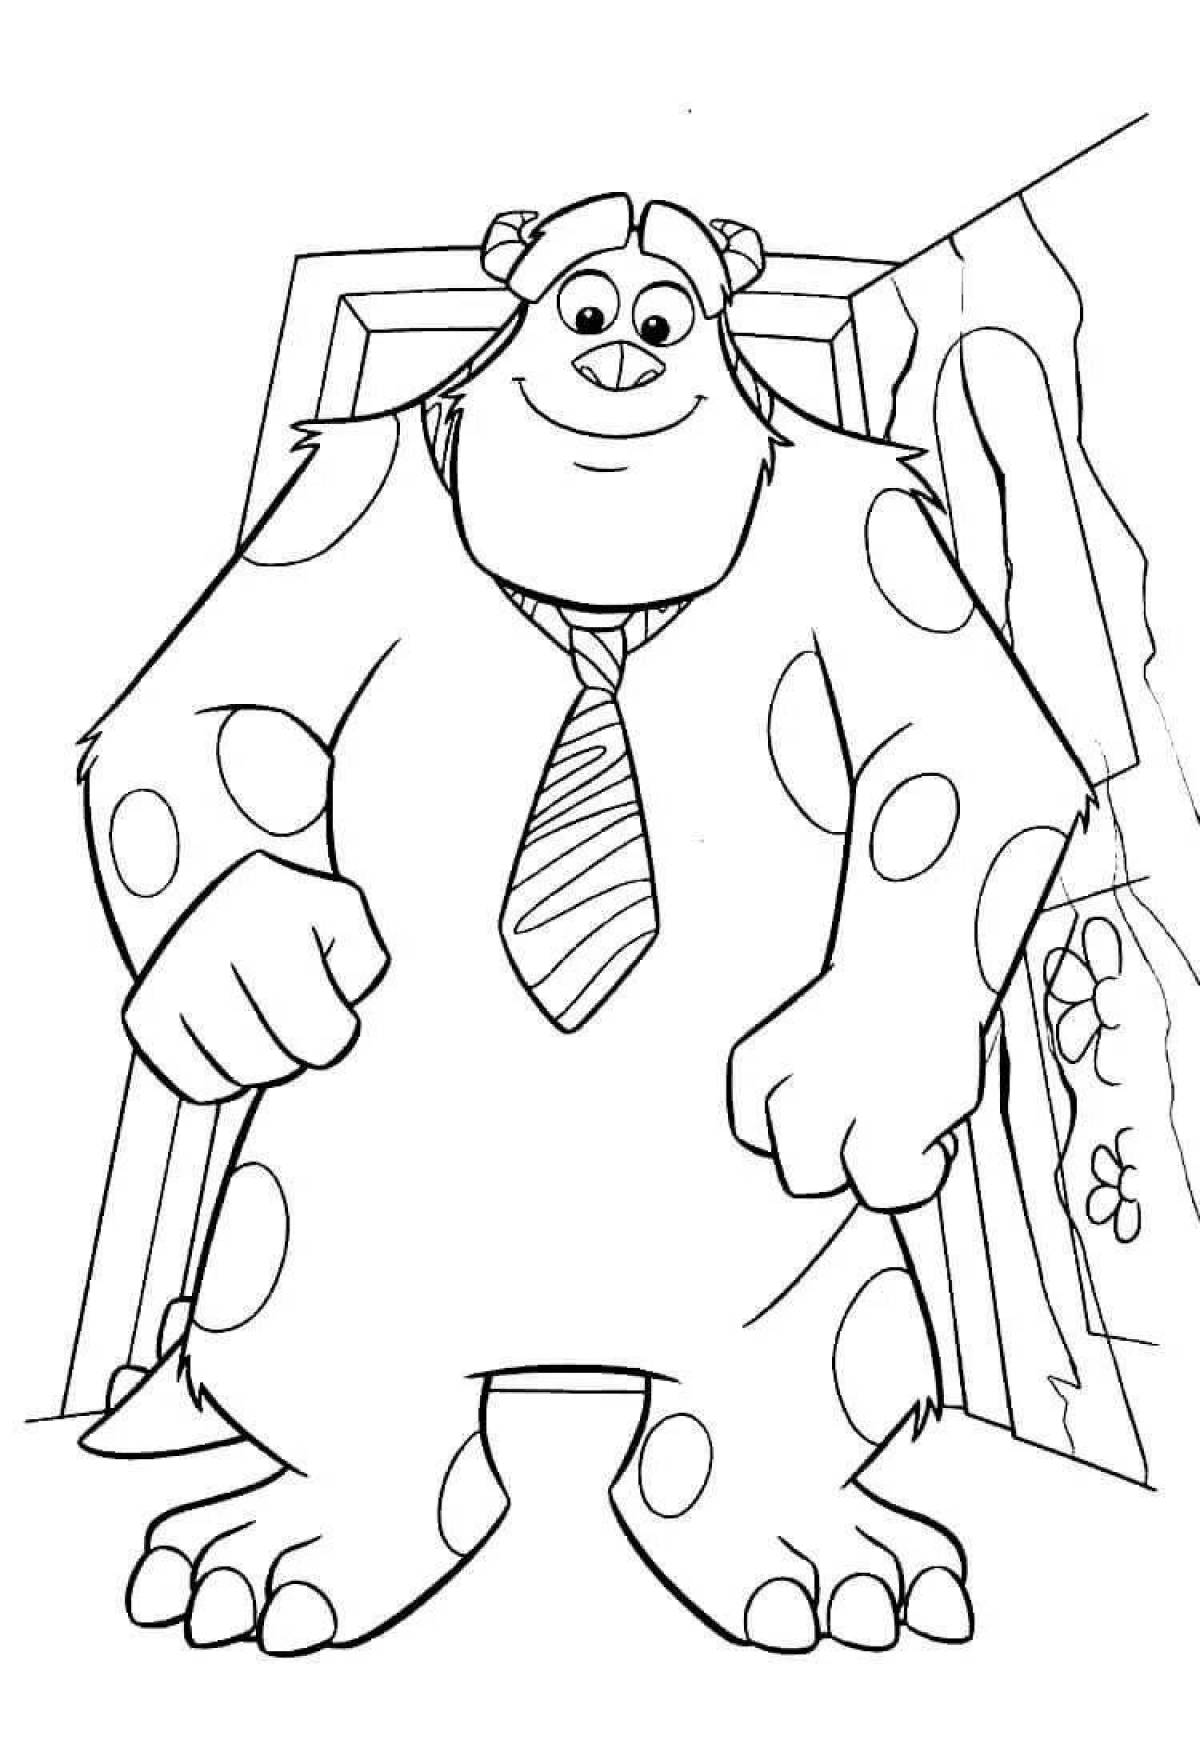 Coloring page charming gray monster